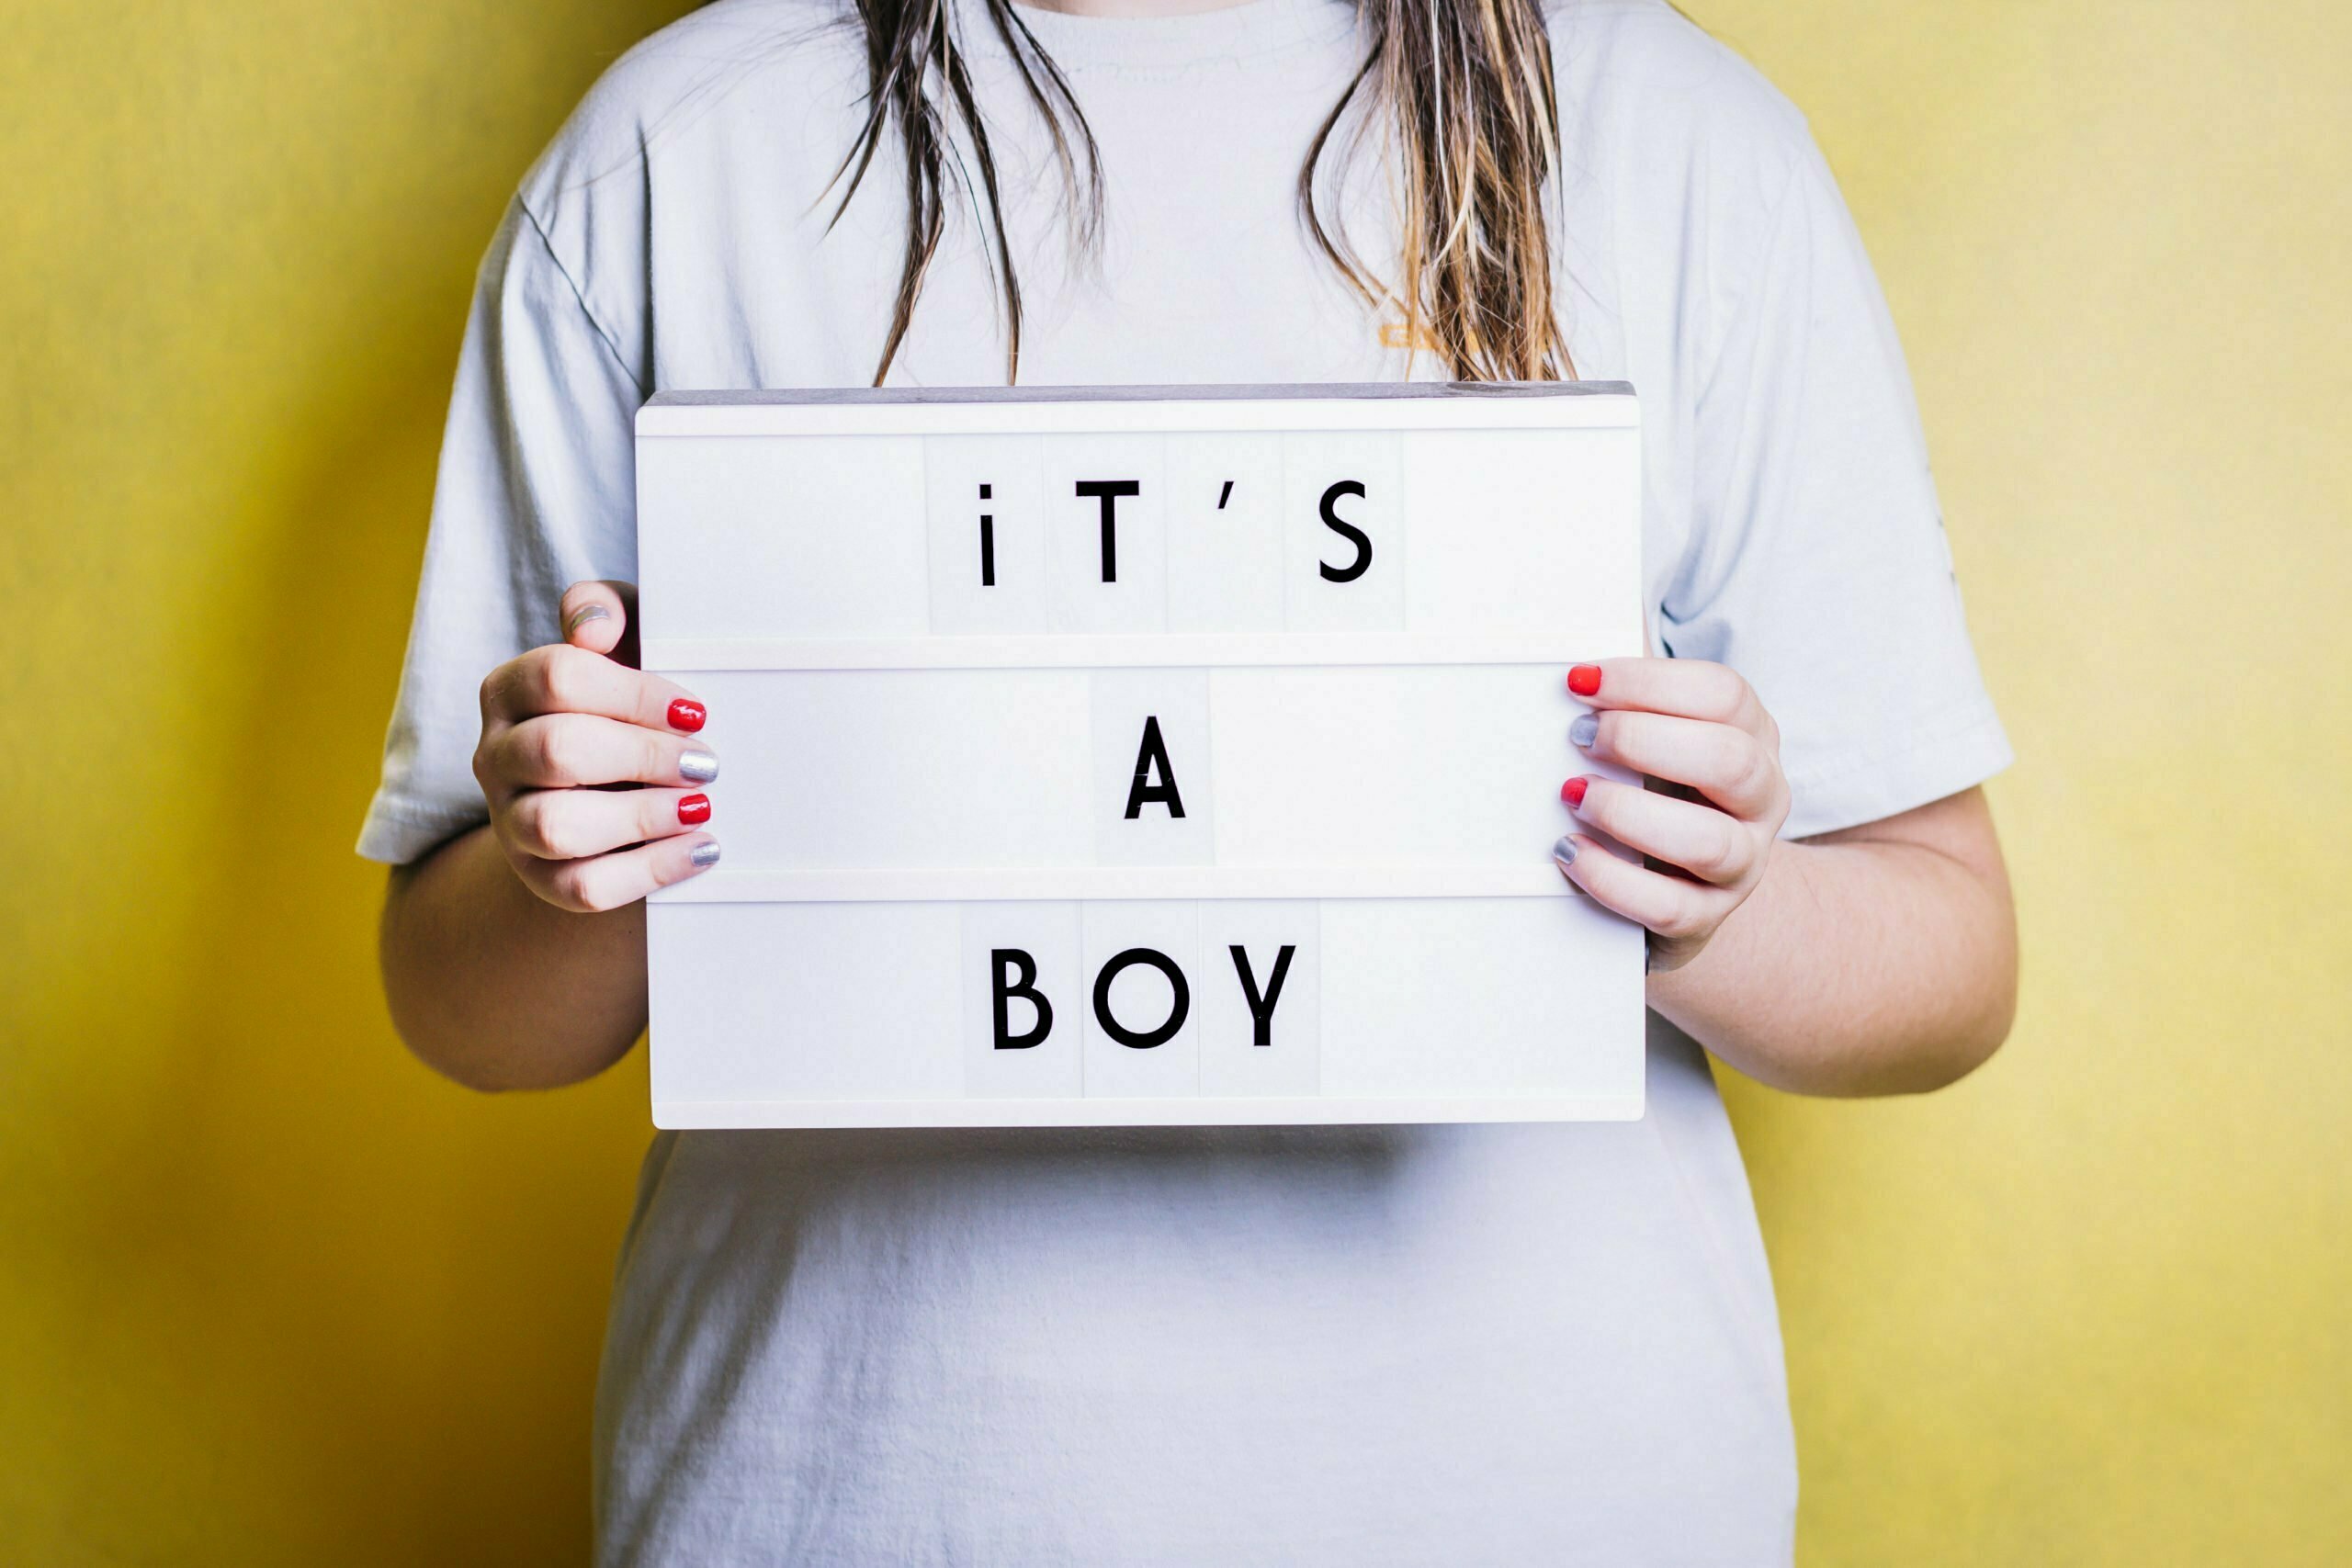 Girl holding a light box with the phrase "it's a boy".